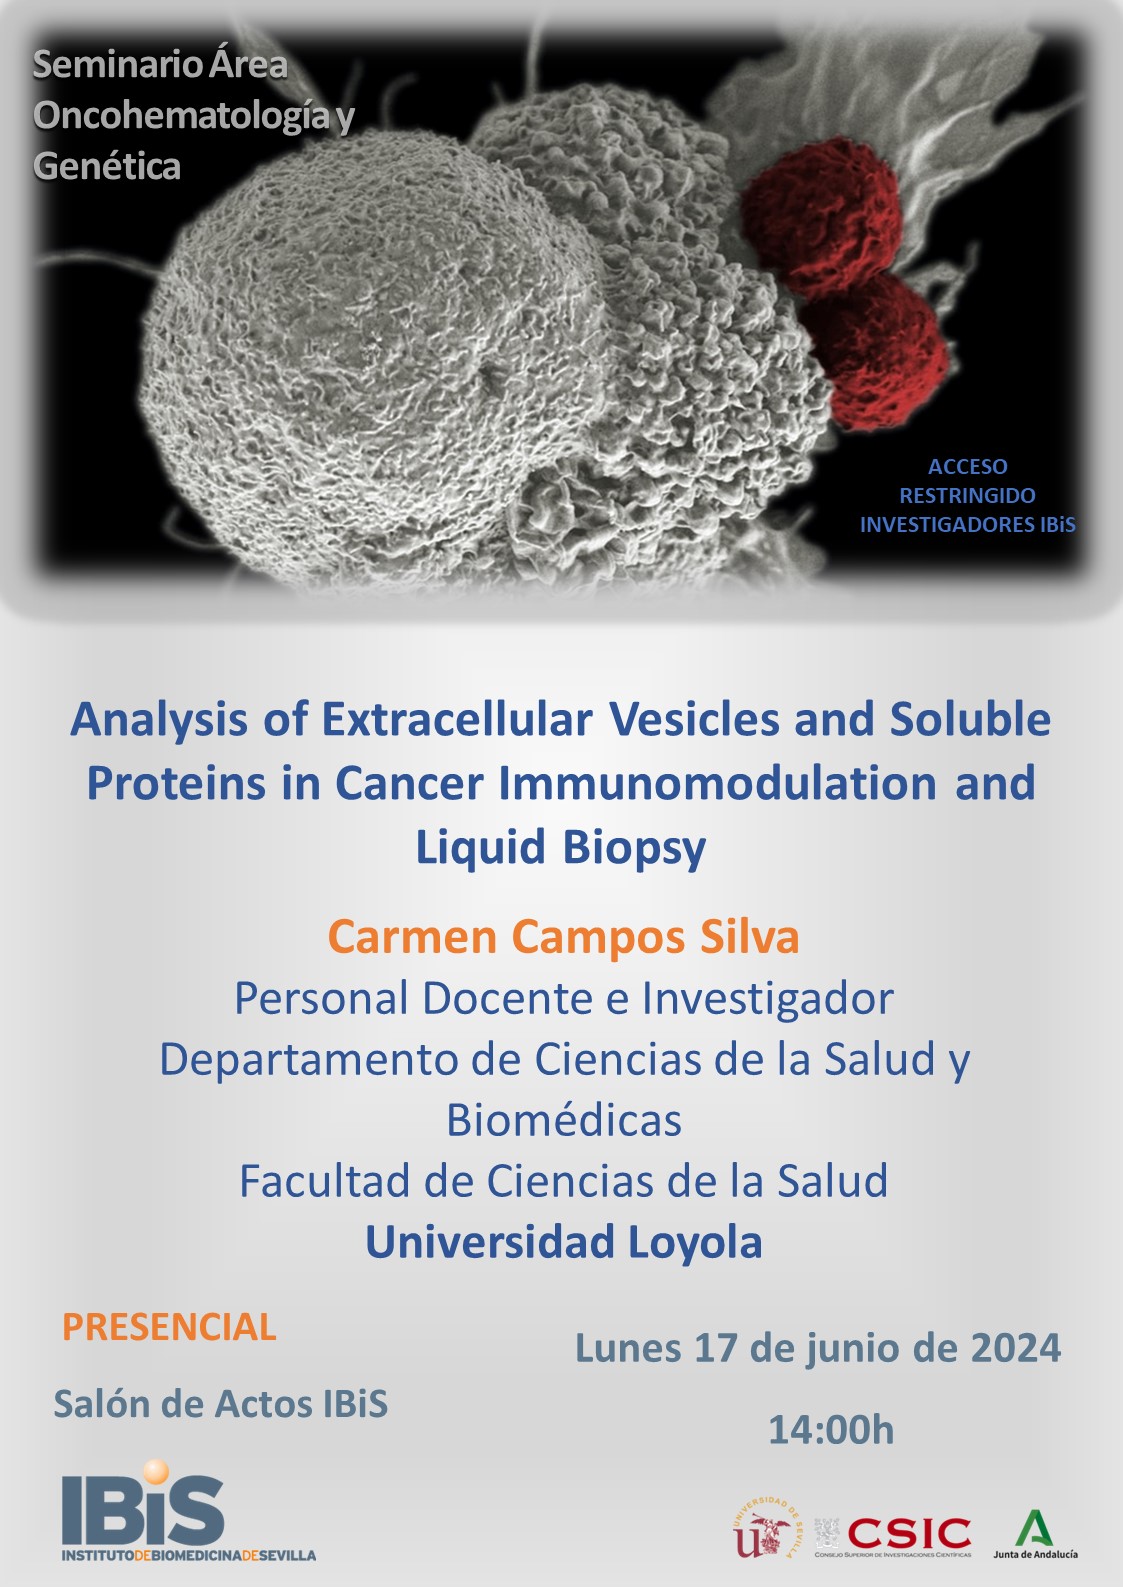 Poster: Analysis of Extracellular Vesicles and Soluble Proteins in Cancer Immunomodulation and Liquid Biopsy